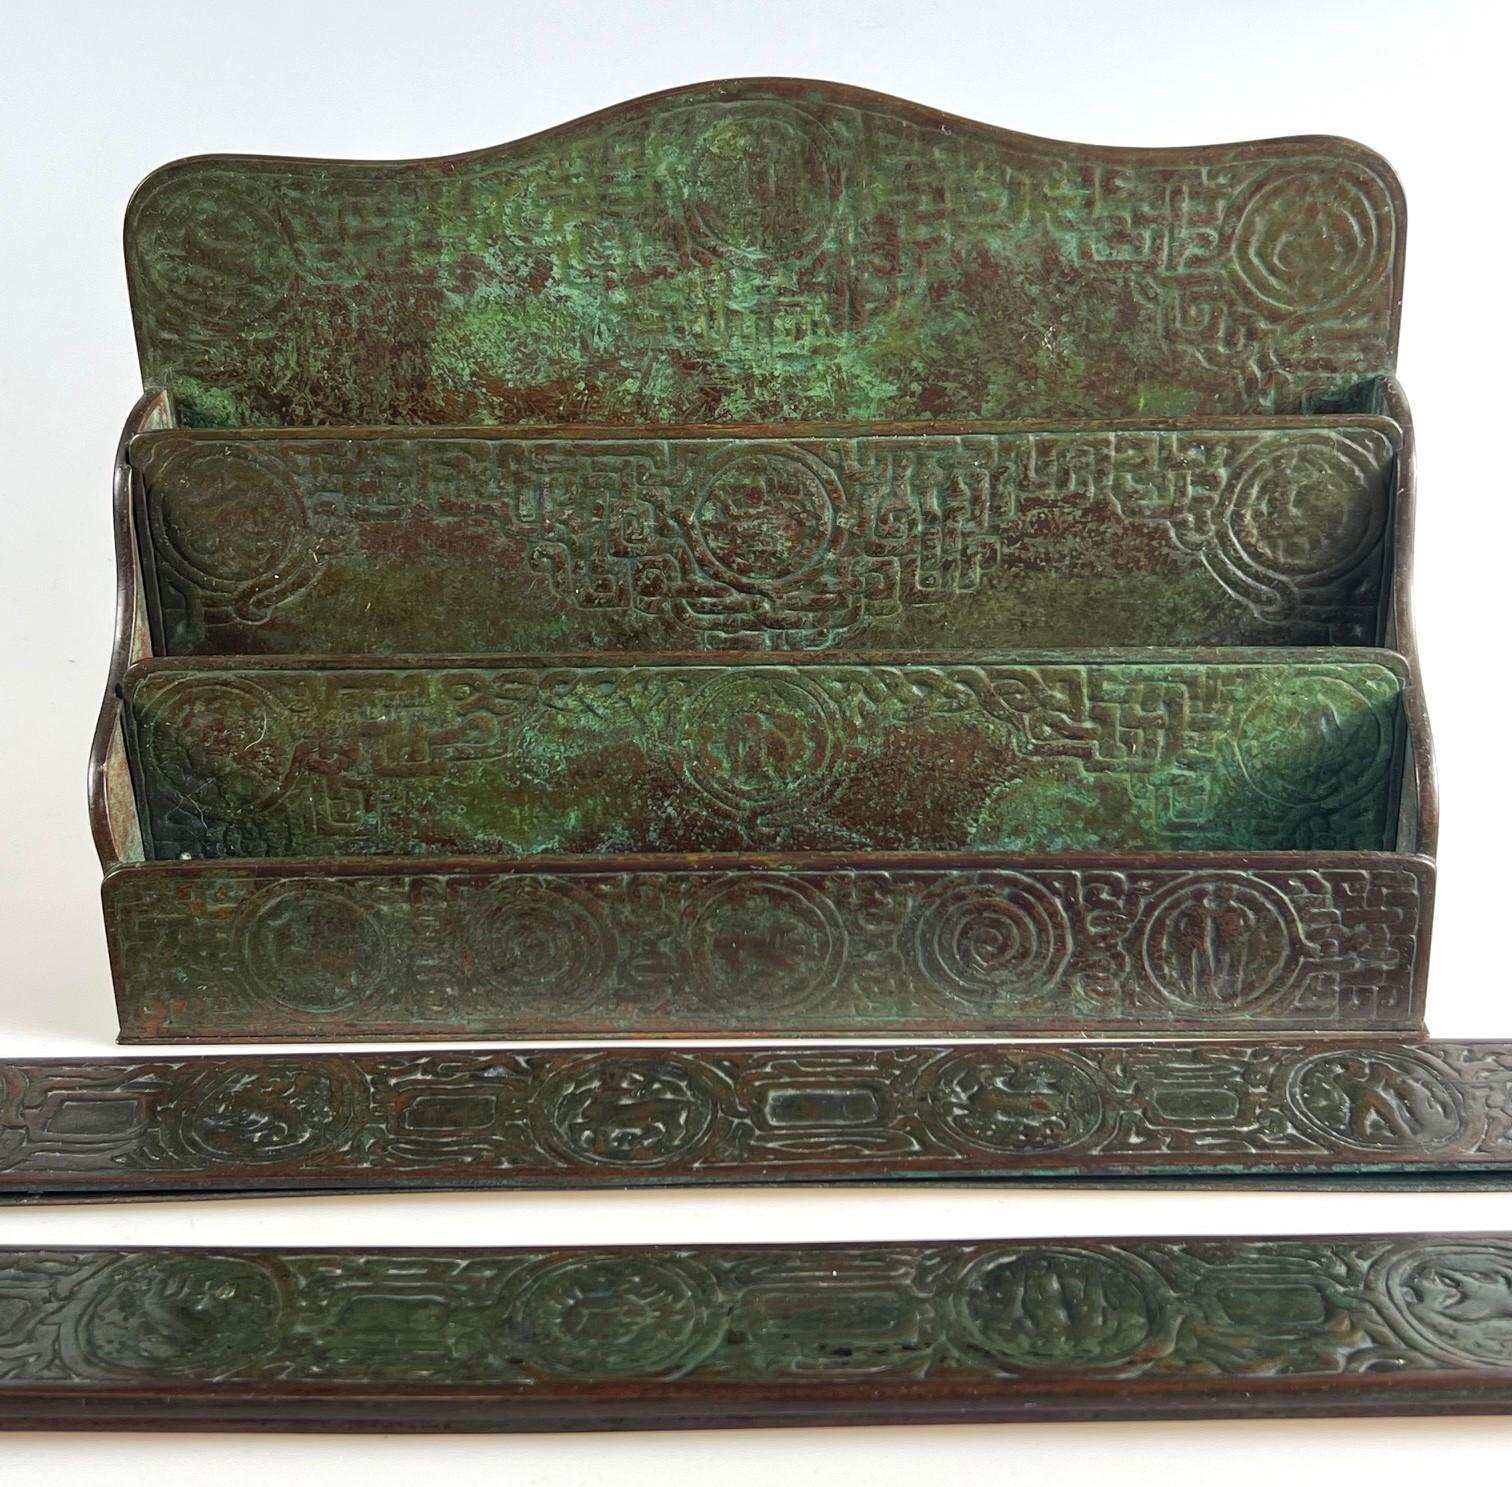 Tiffany Studios American Arts and Crafts style patinated letter box and blotter ends.  This set retains significant green and red patina and over the years had accumulated some black tones that were gently cleaned but not removed because many would